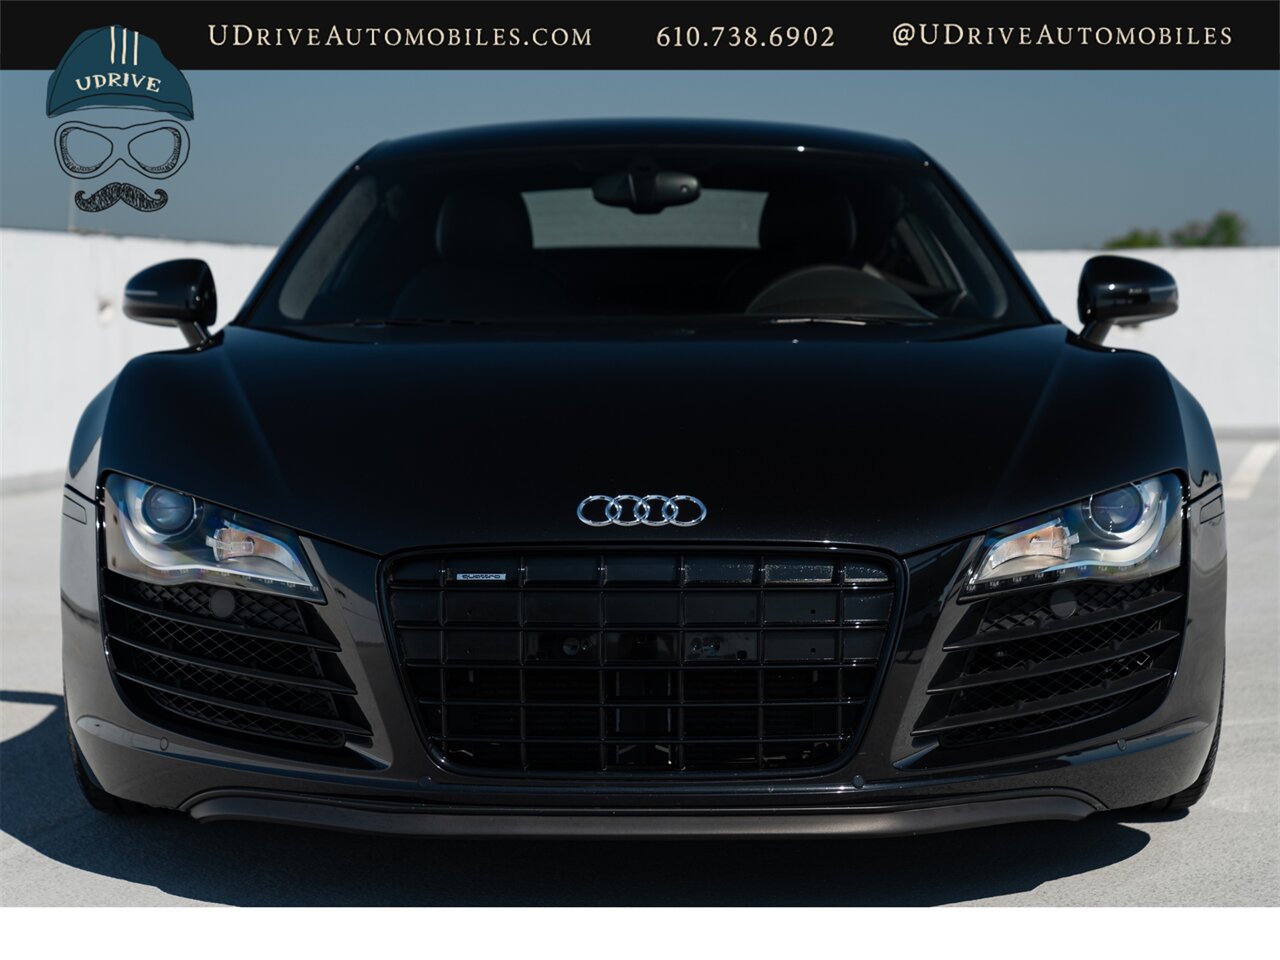 2009 Audi R8 Quattro  4.2L V8 6 Speed Manual - Photo 13 - West Chester, PA 19382